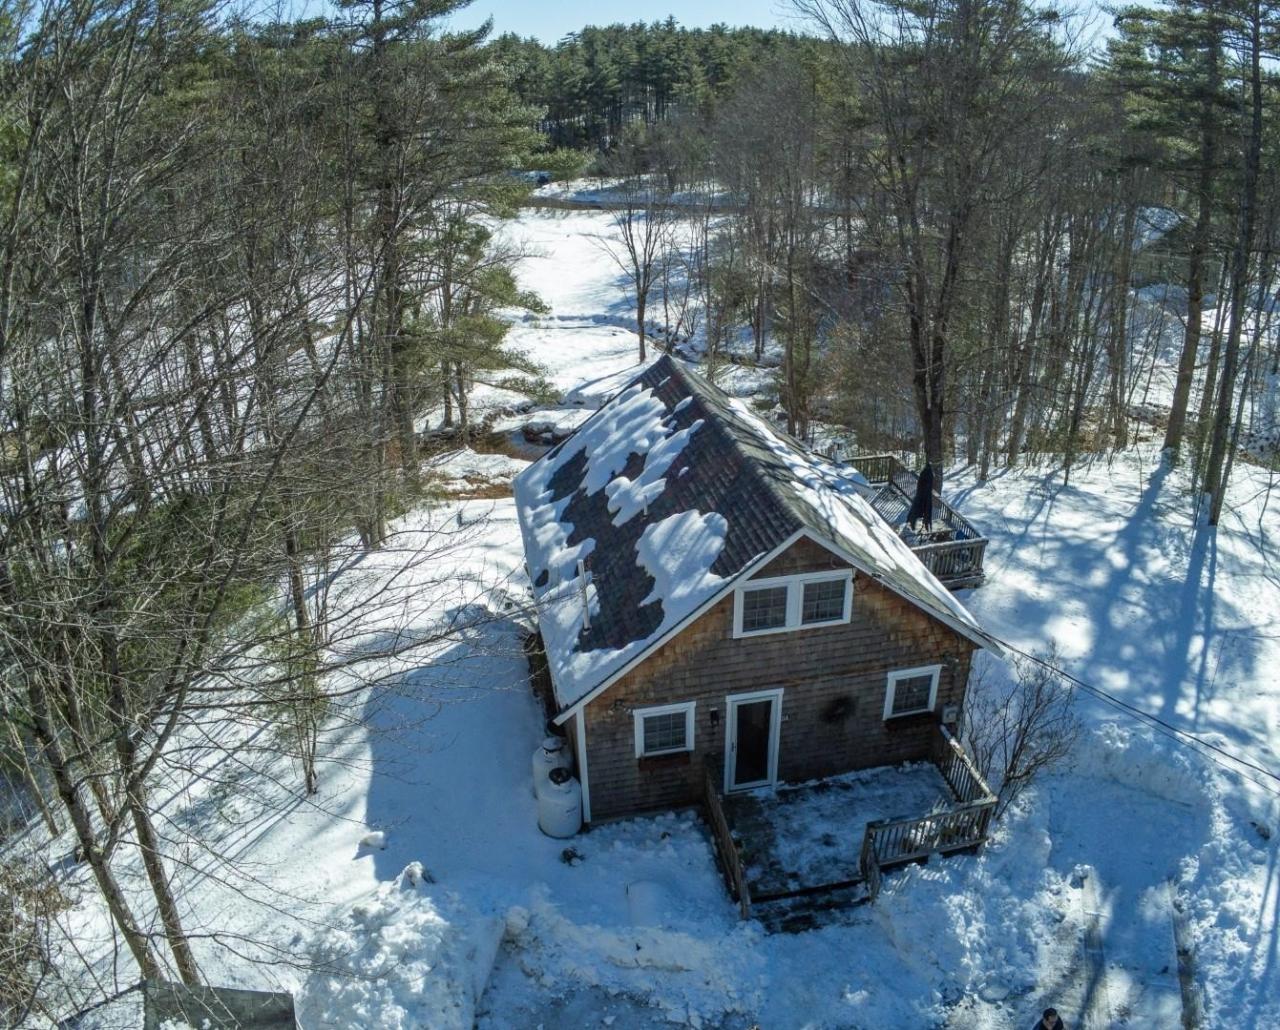  Guided Tour 51 Mill pond Road, Wakefield, NH 03830: Homes for Sale - Hommati  899f302a09fd8fe373ae78e15463025c